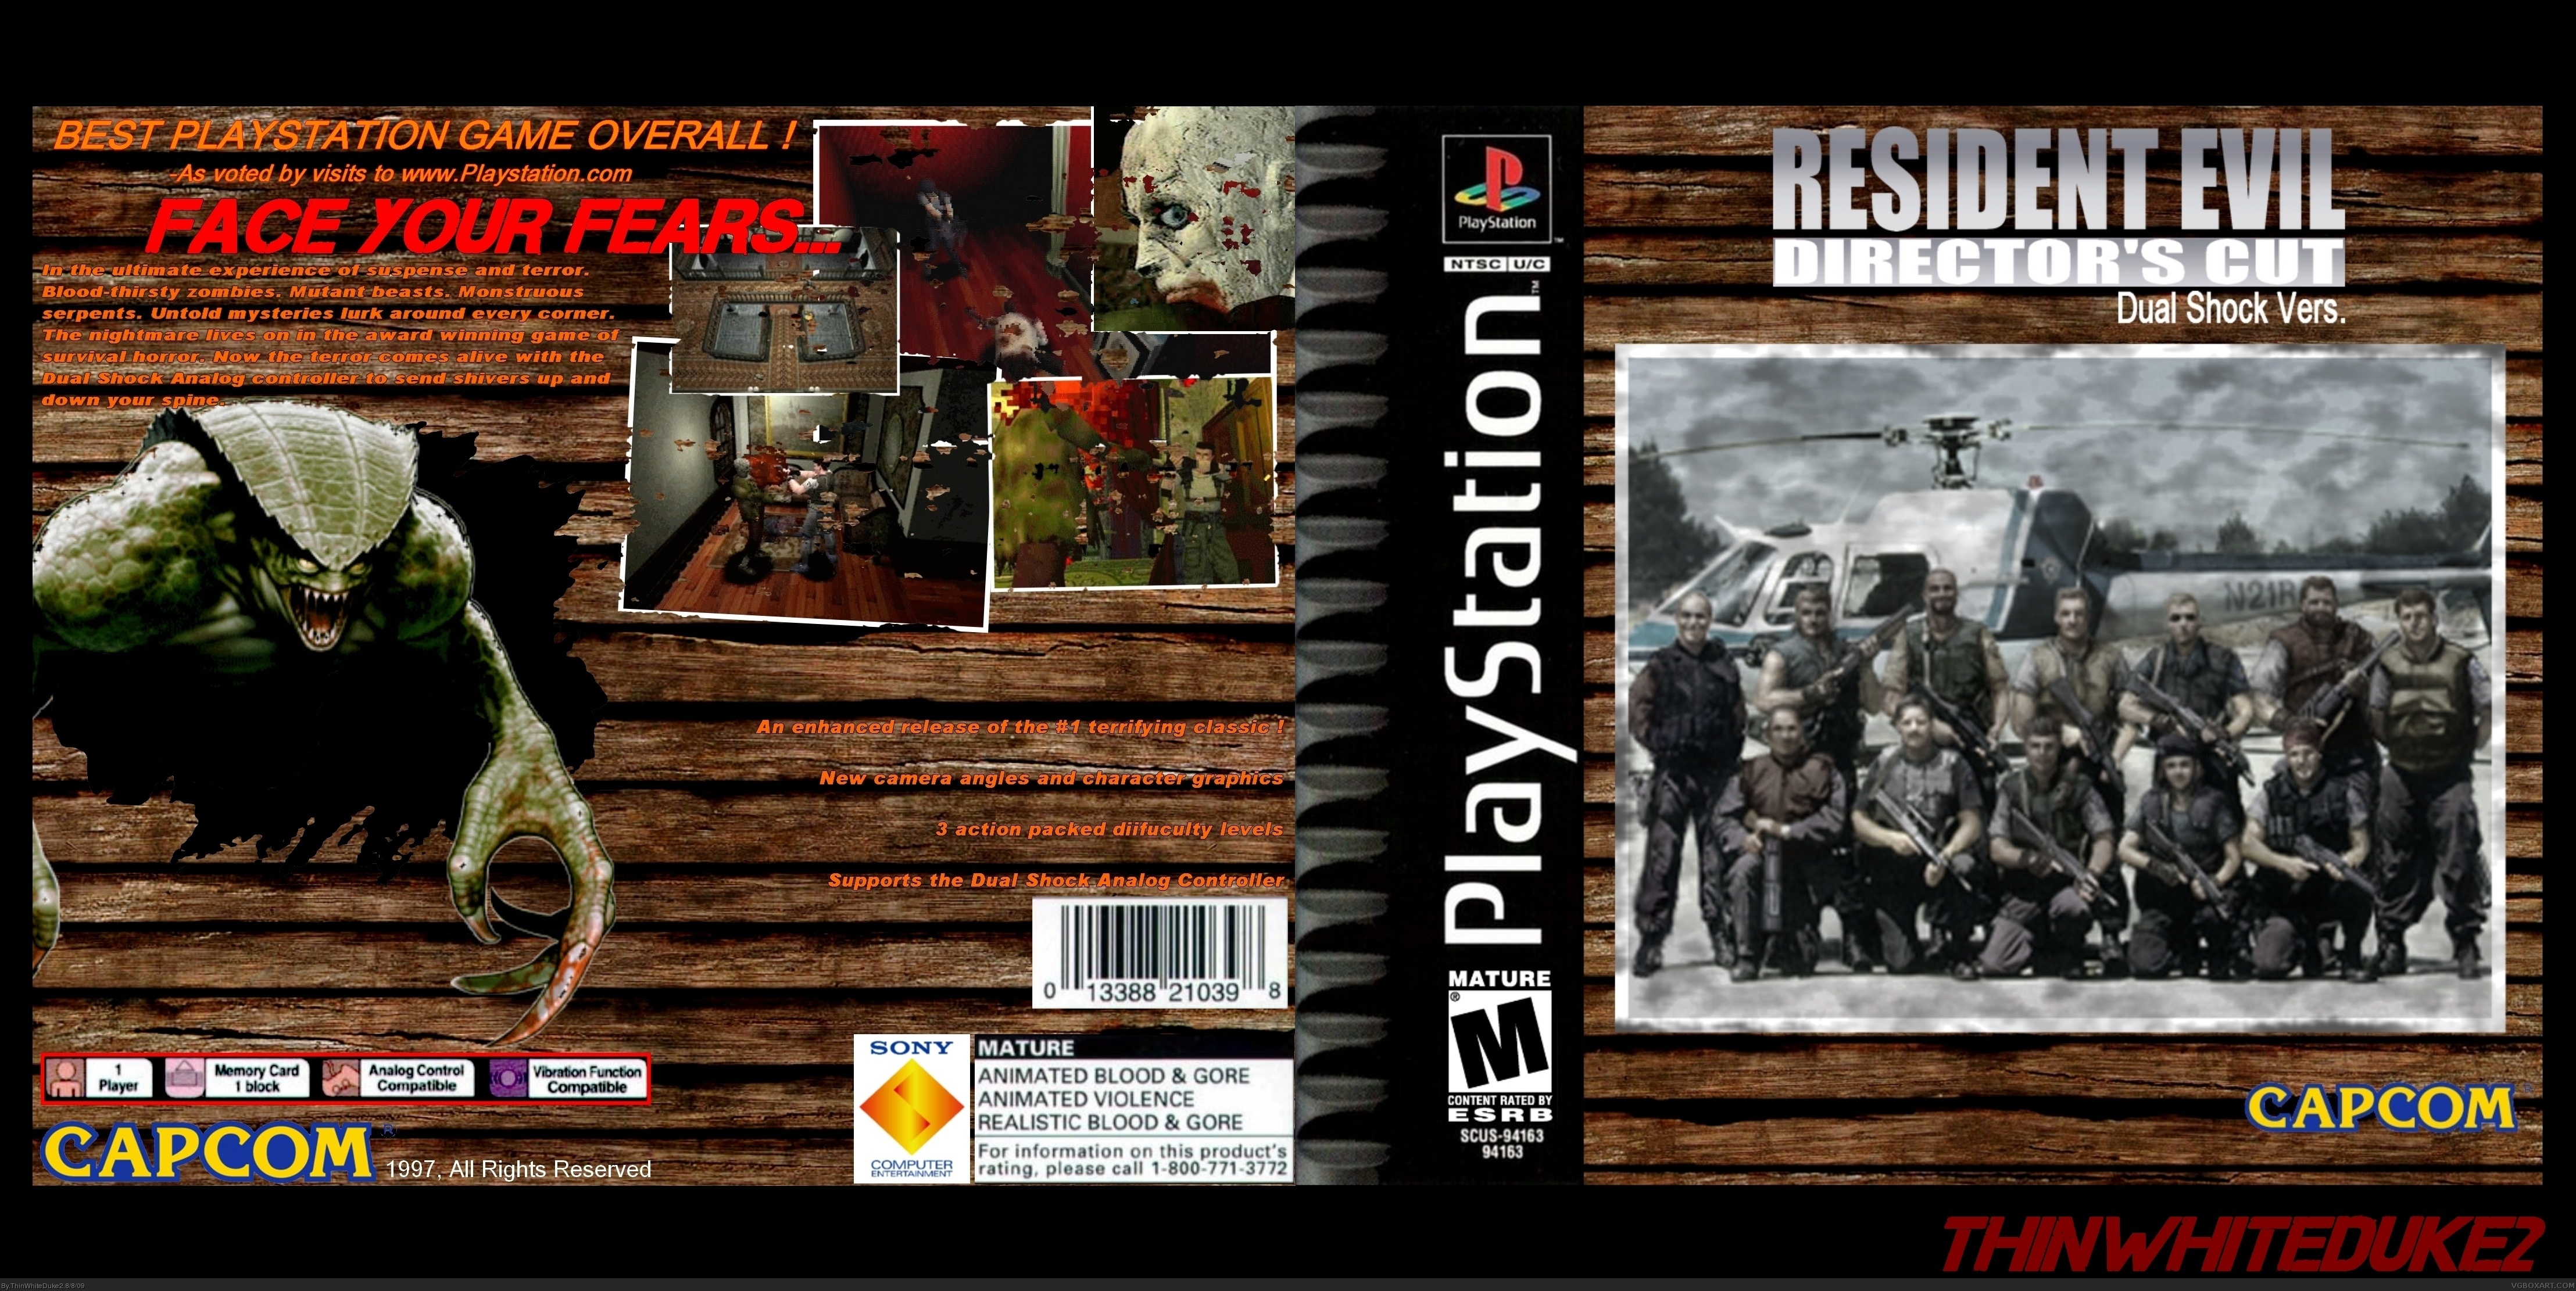 Resident Evil Director's Cut box cover